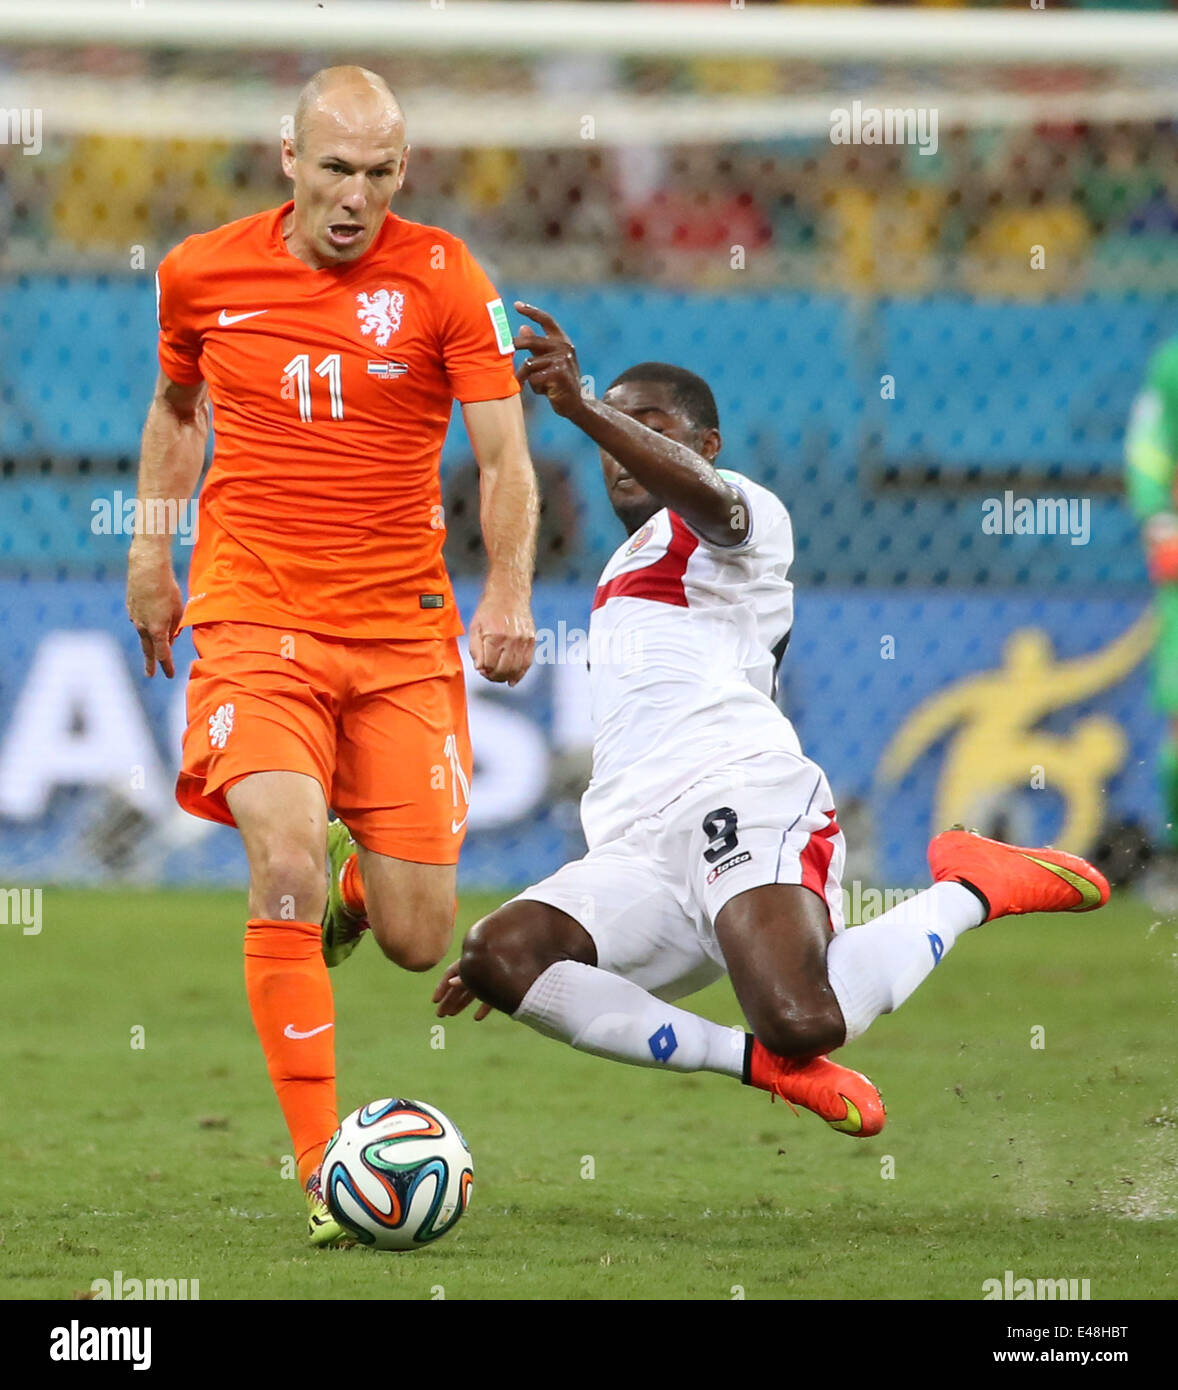 Salvador, Brazil. 5th July, 2014. Costa Rica's Joel Campbell (R) vies with Netherlands' Arjen Robben during a quarter-finals match between Netherlands and Costa Rica of 2014 FIFA World Cup at the Arena Fonte Nova Stadium in Salvador, Brazil, on July 5, 2014. Credit:  Cao Can/Xinhua/Alamy Live News Stock Photo